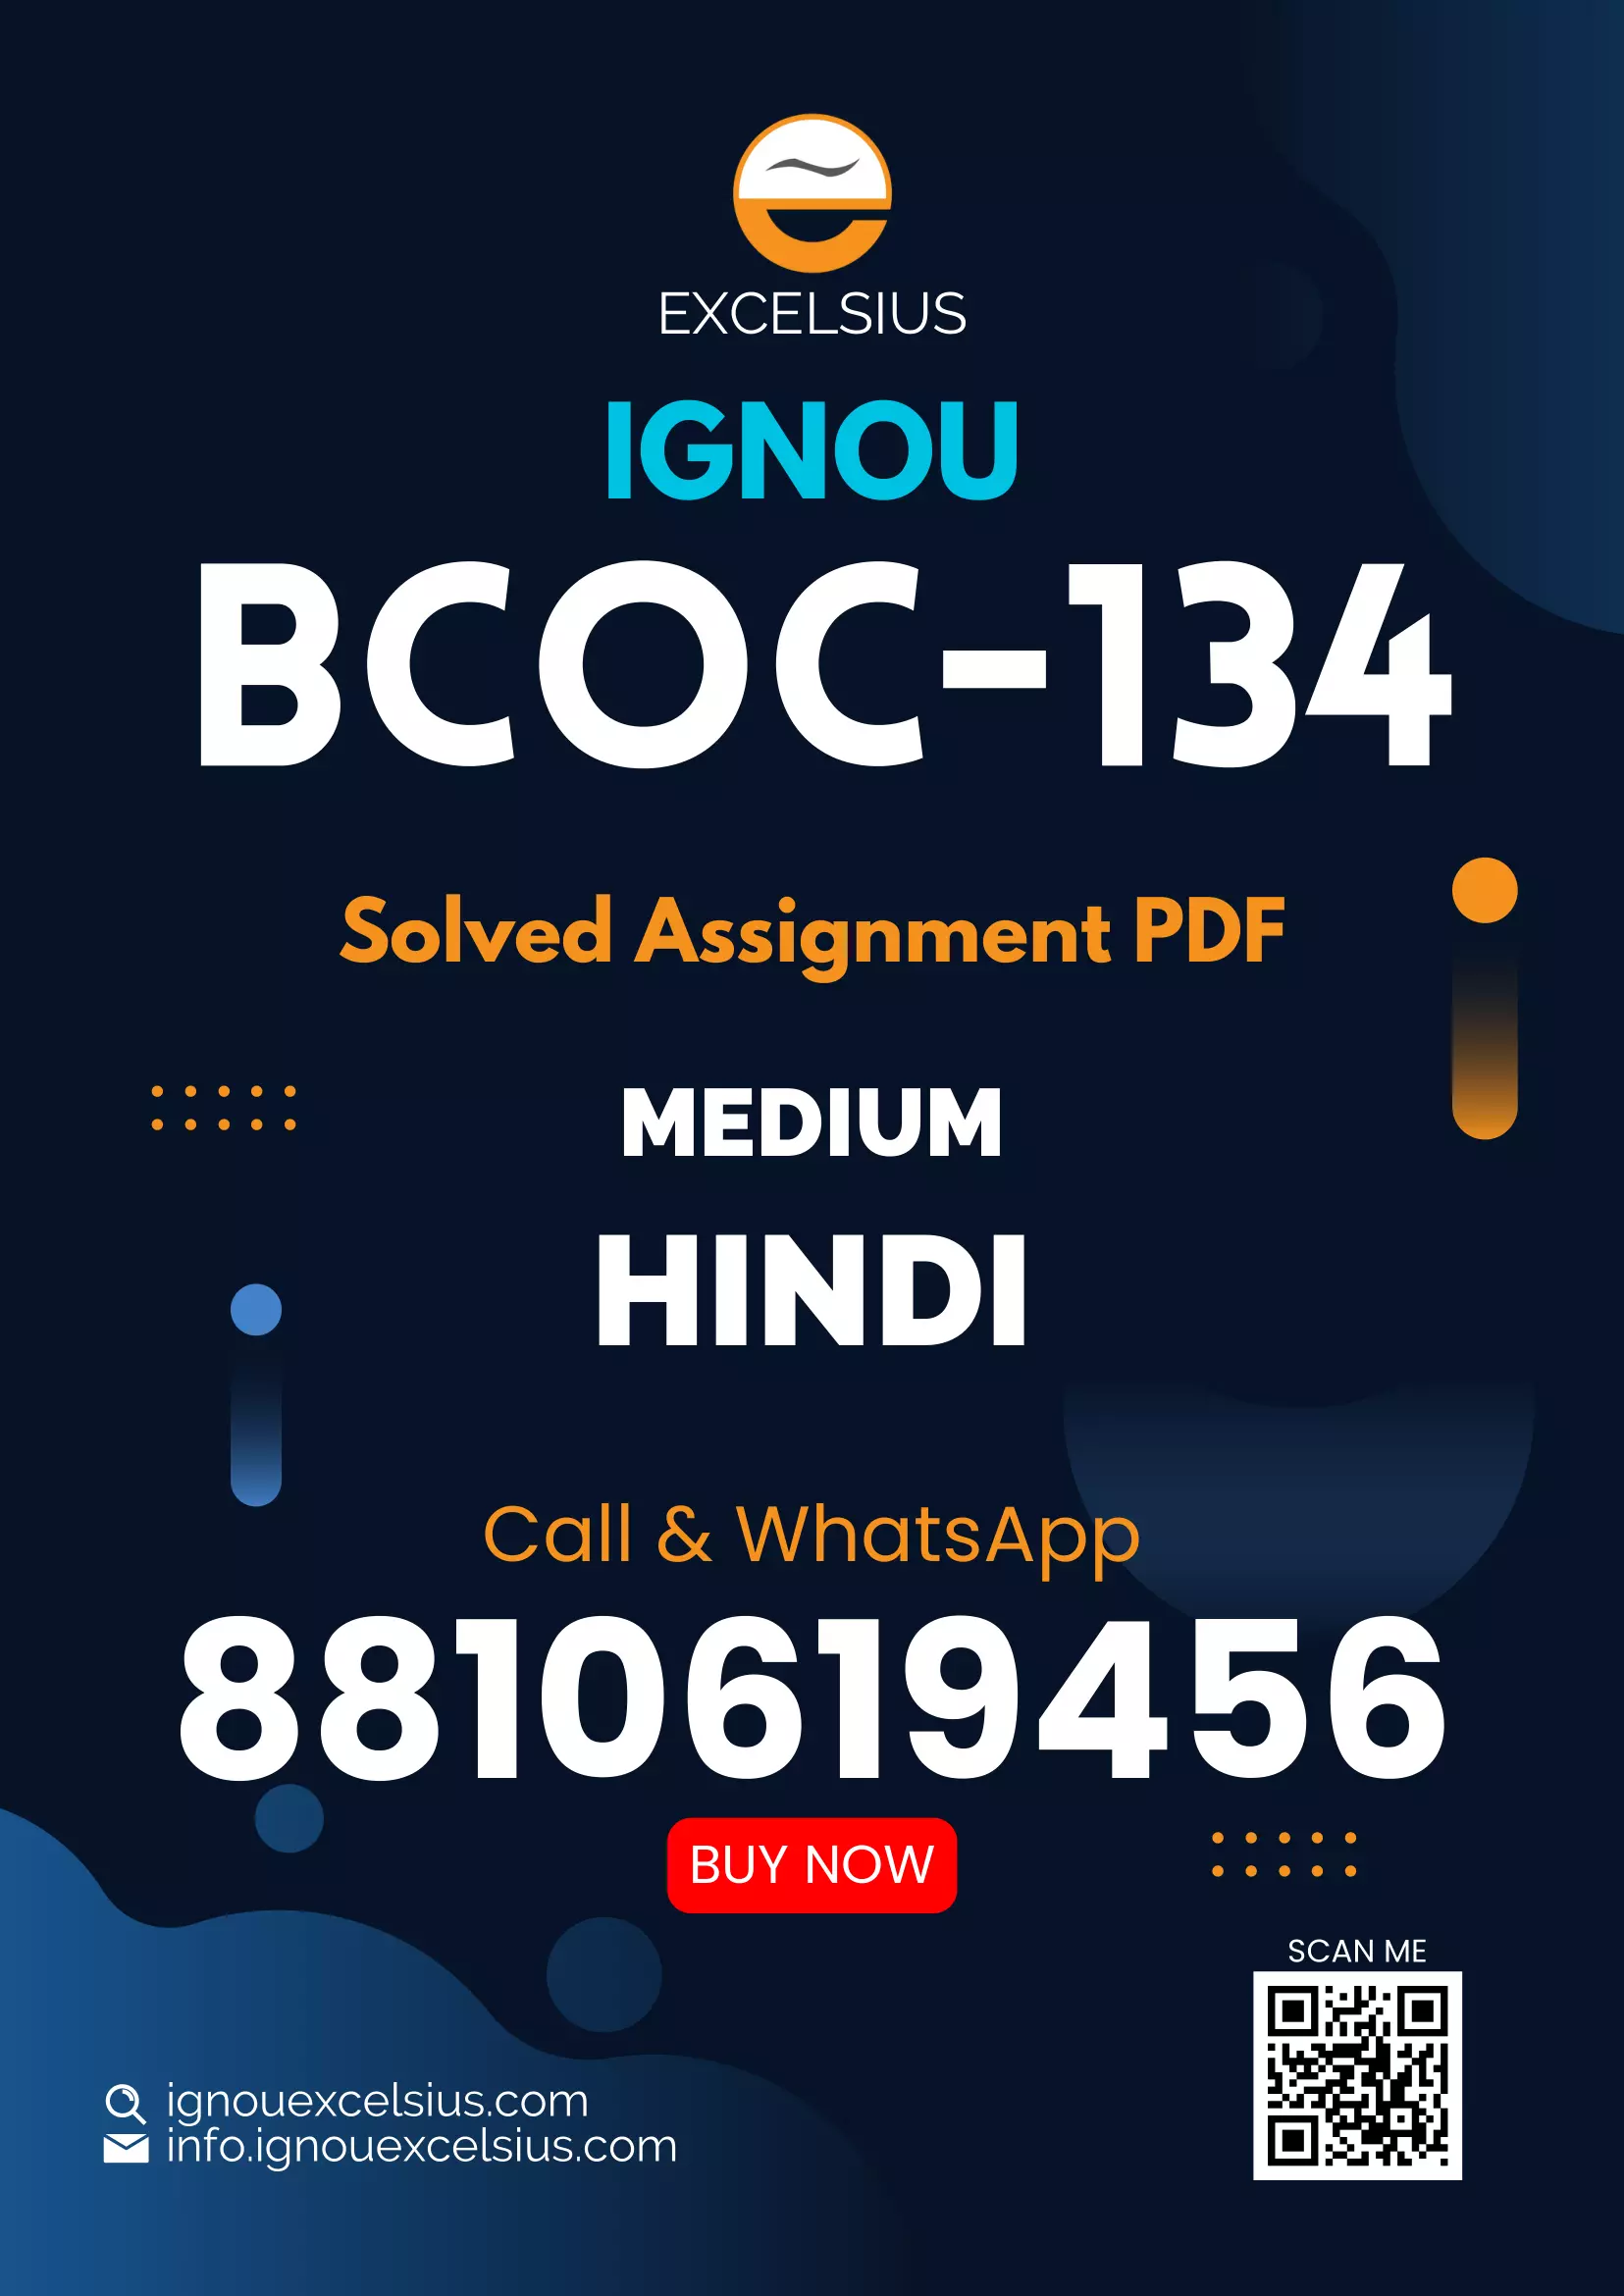 IGNOU BCOC-134 - Business Mathematics and Statistics, Latest Solved Assignment-January 2023 - December 2023